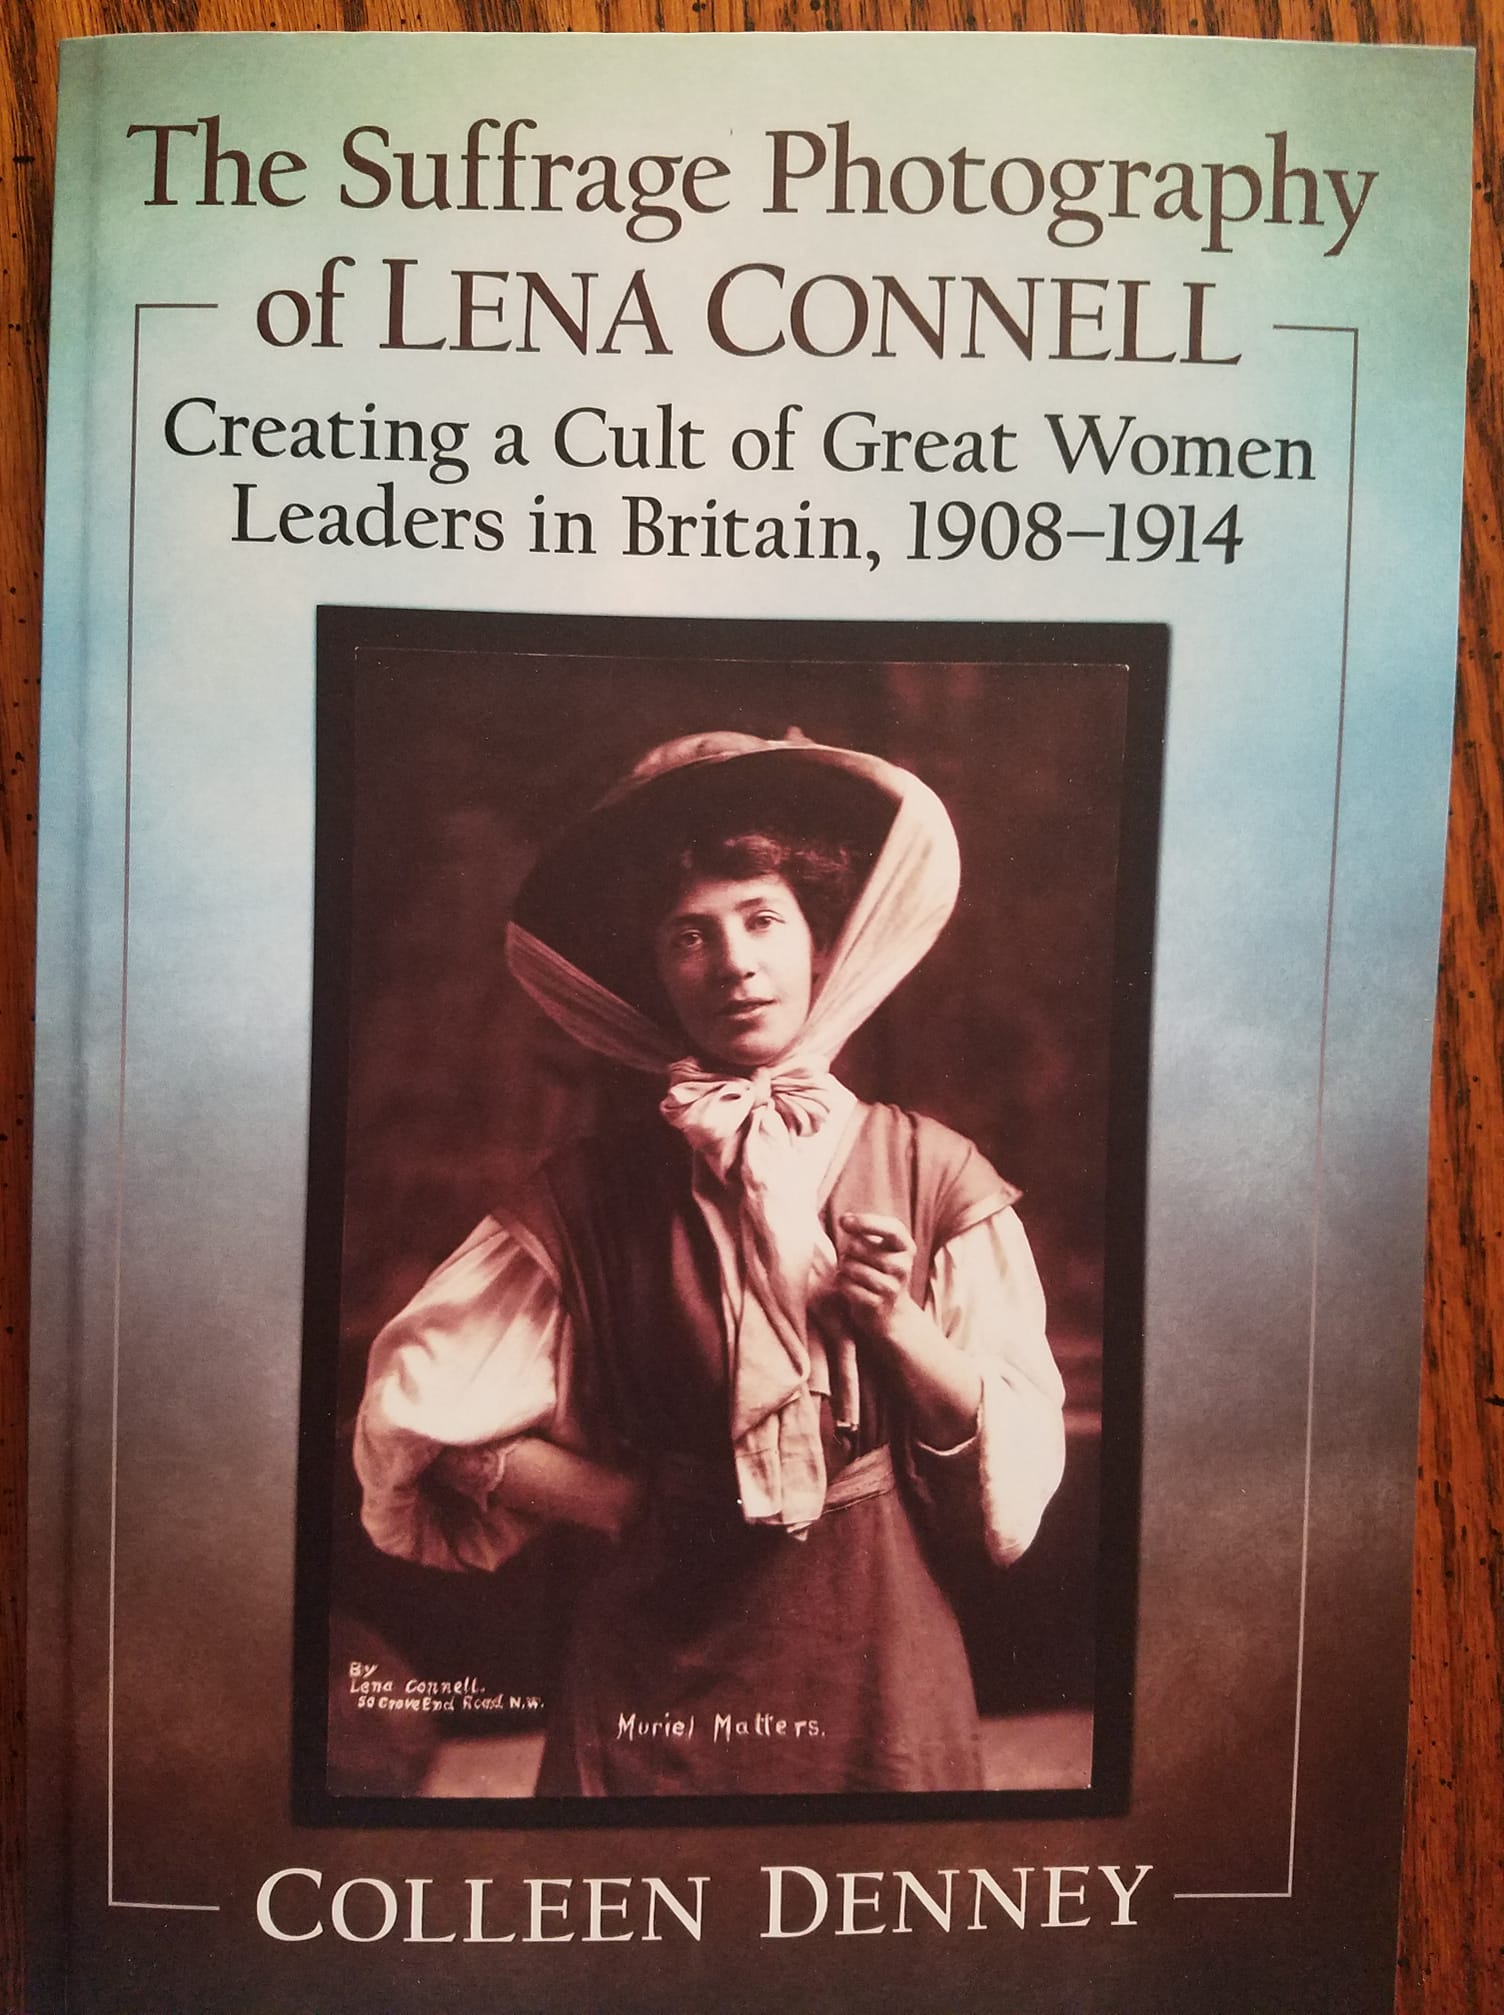 connell-book-cover.jpg